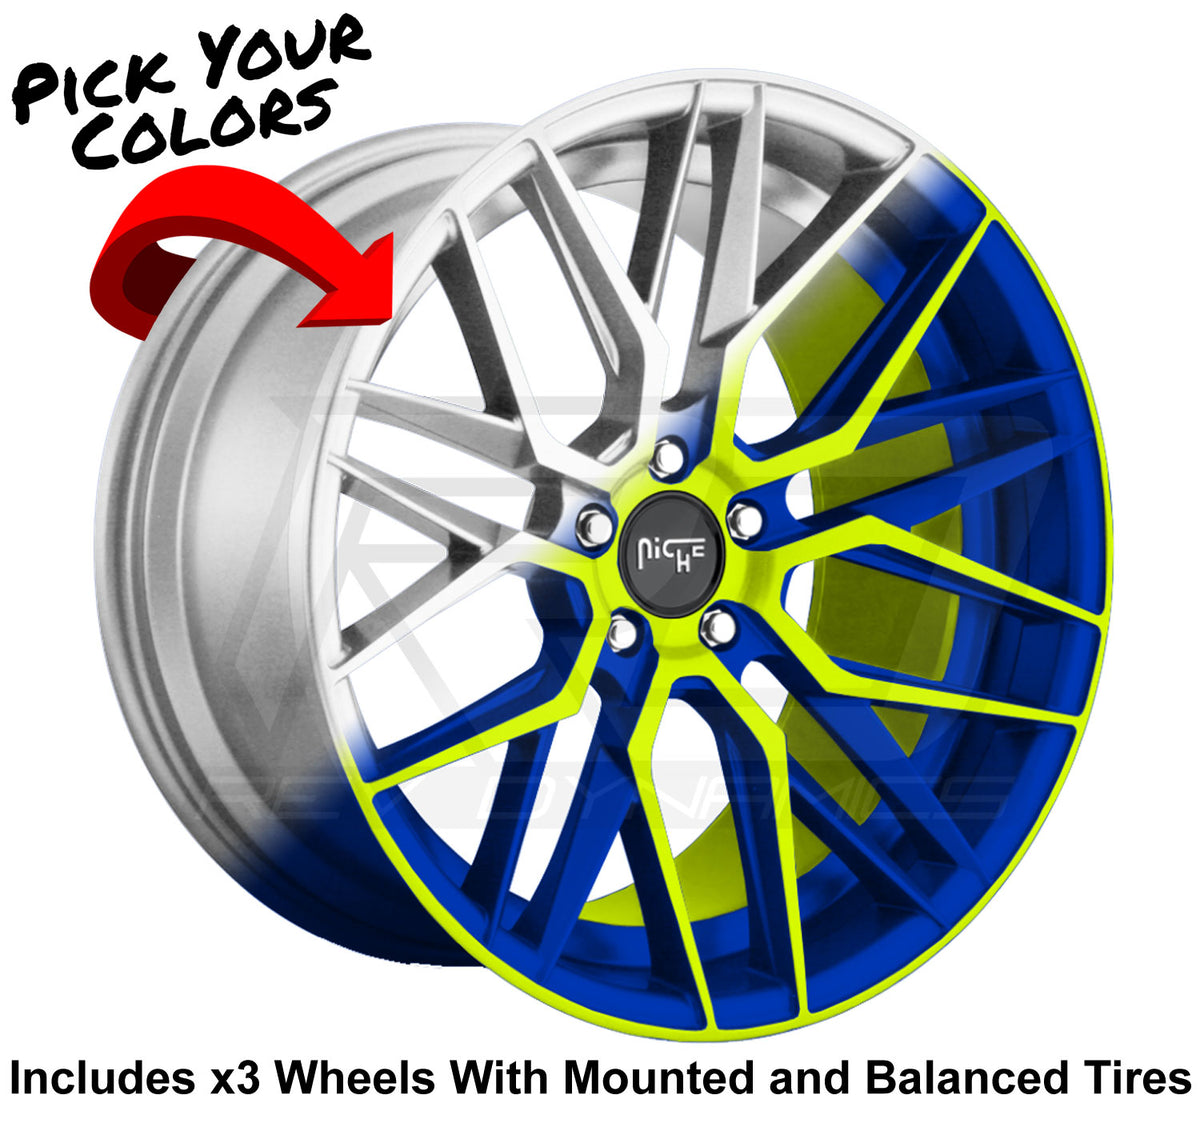 Niche Gamma 20" Slingshot Wheel and Tire Package - Rev Dynamics